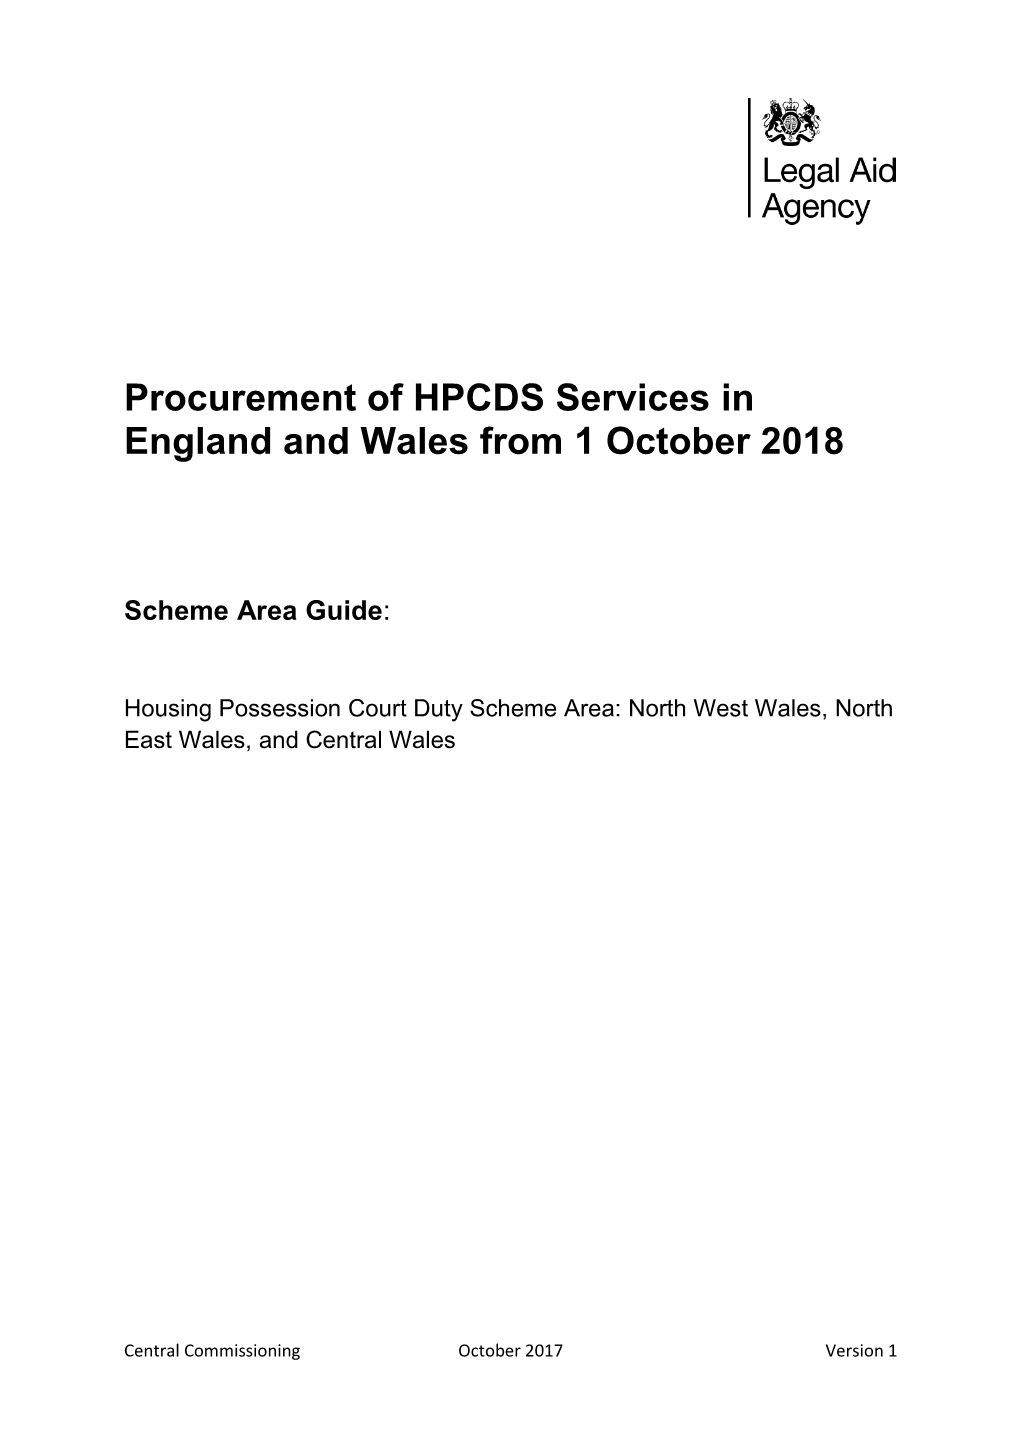 Procurement of HPCDS Services in England and Wales from 1 October 2018